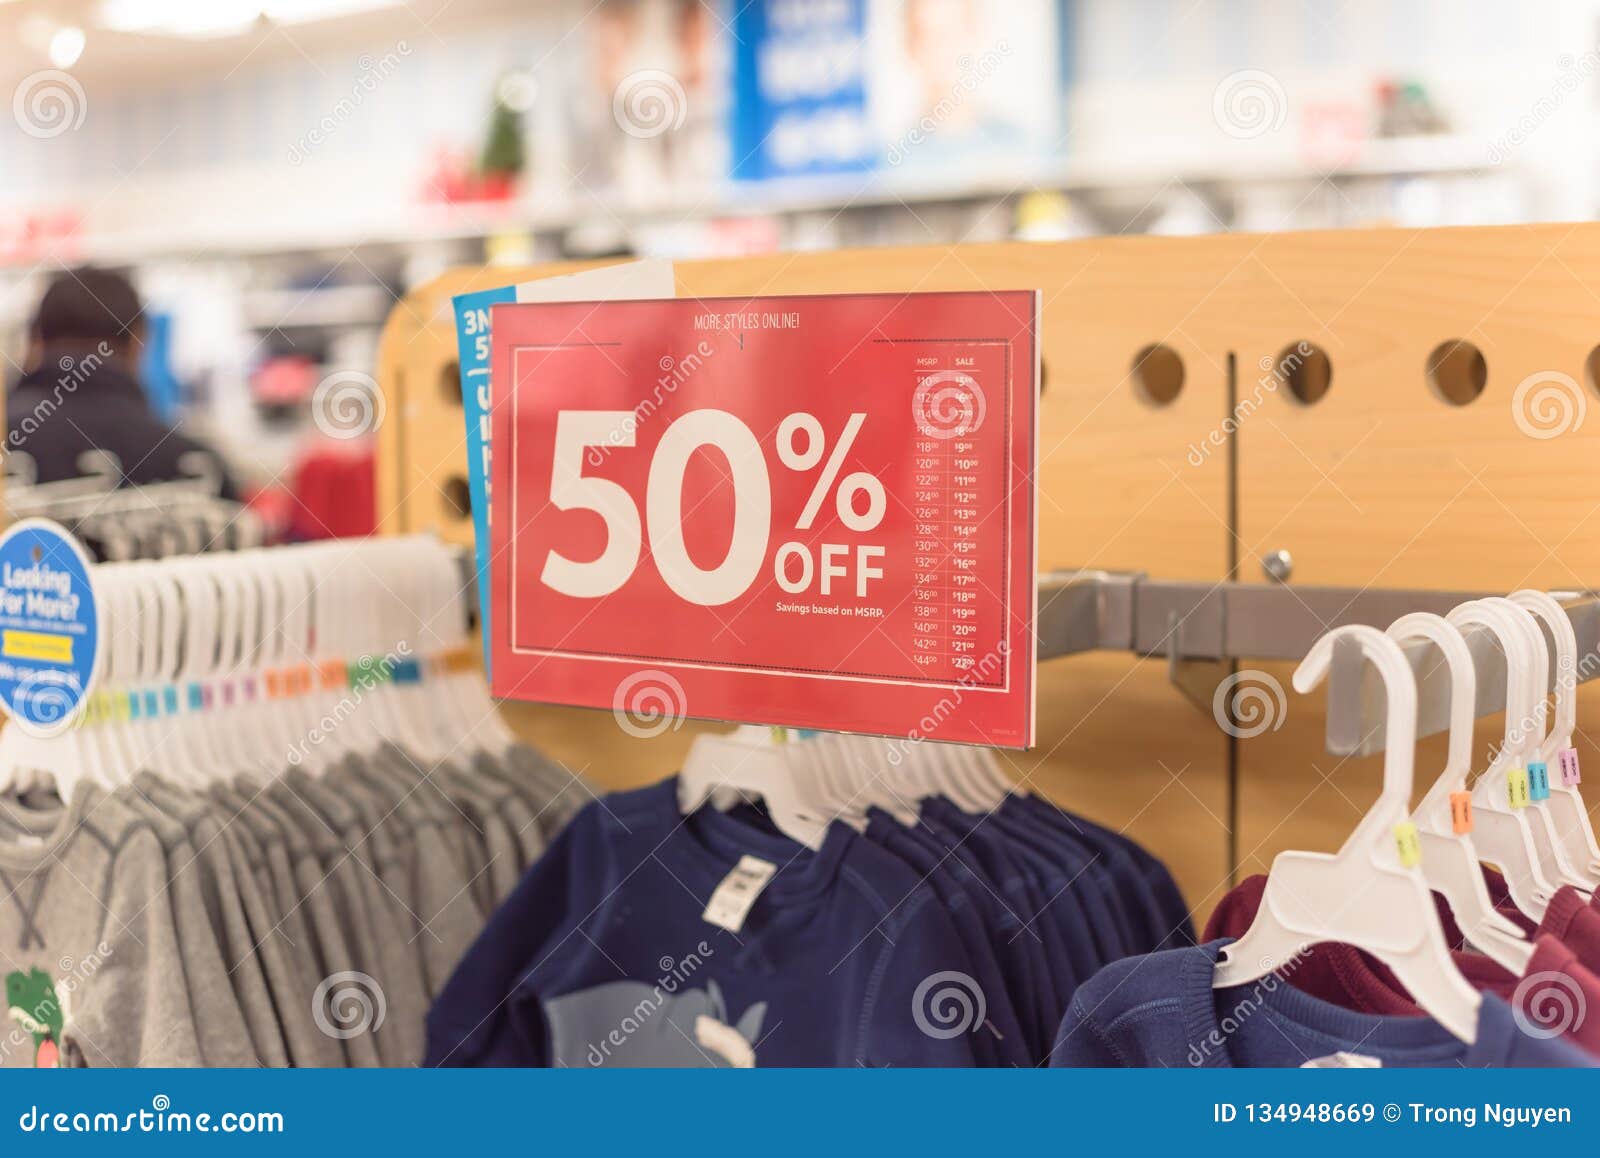 50 Percent Off Sale Sign Over Clothes At Baby Clothing ...